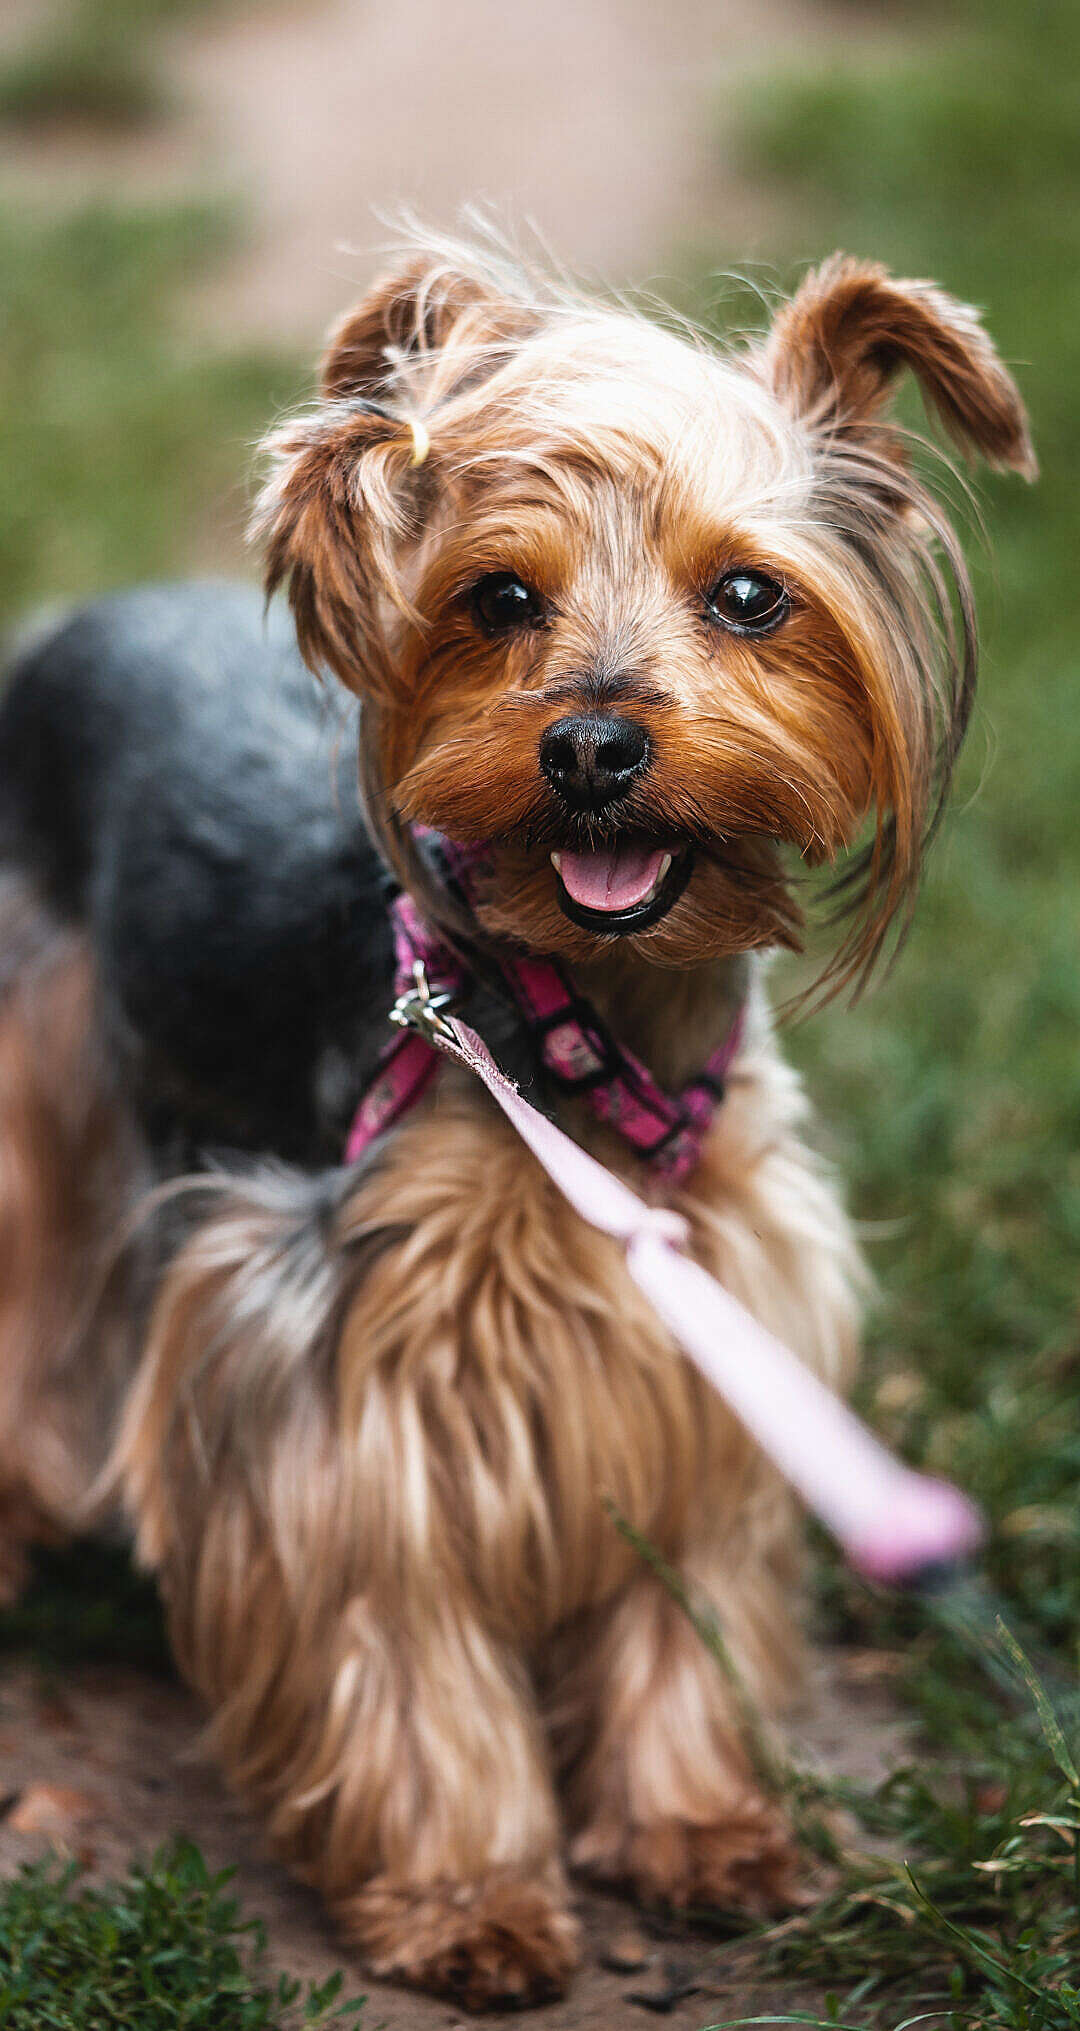 Download Our Yorkshire Terrier Jessie on a Leash FREE Stock Photo